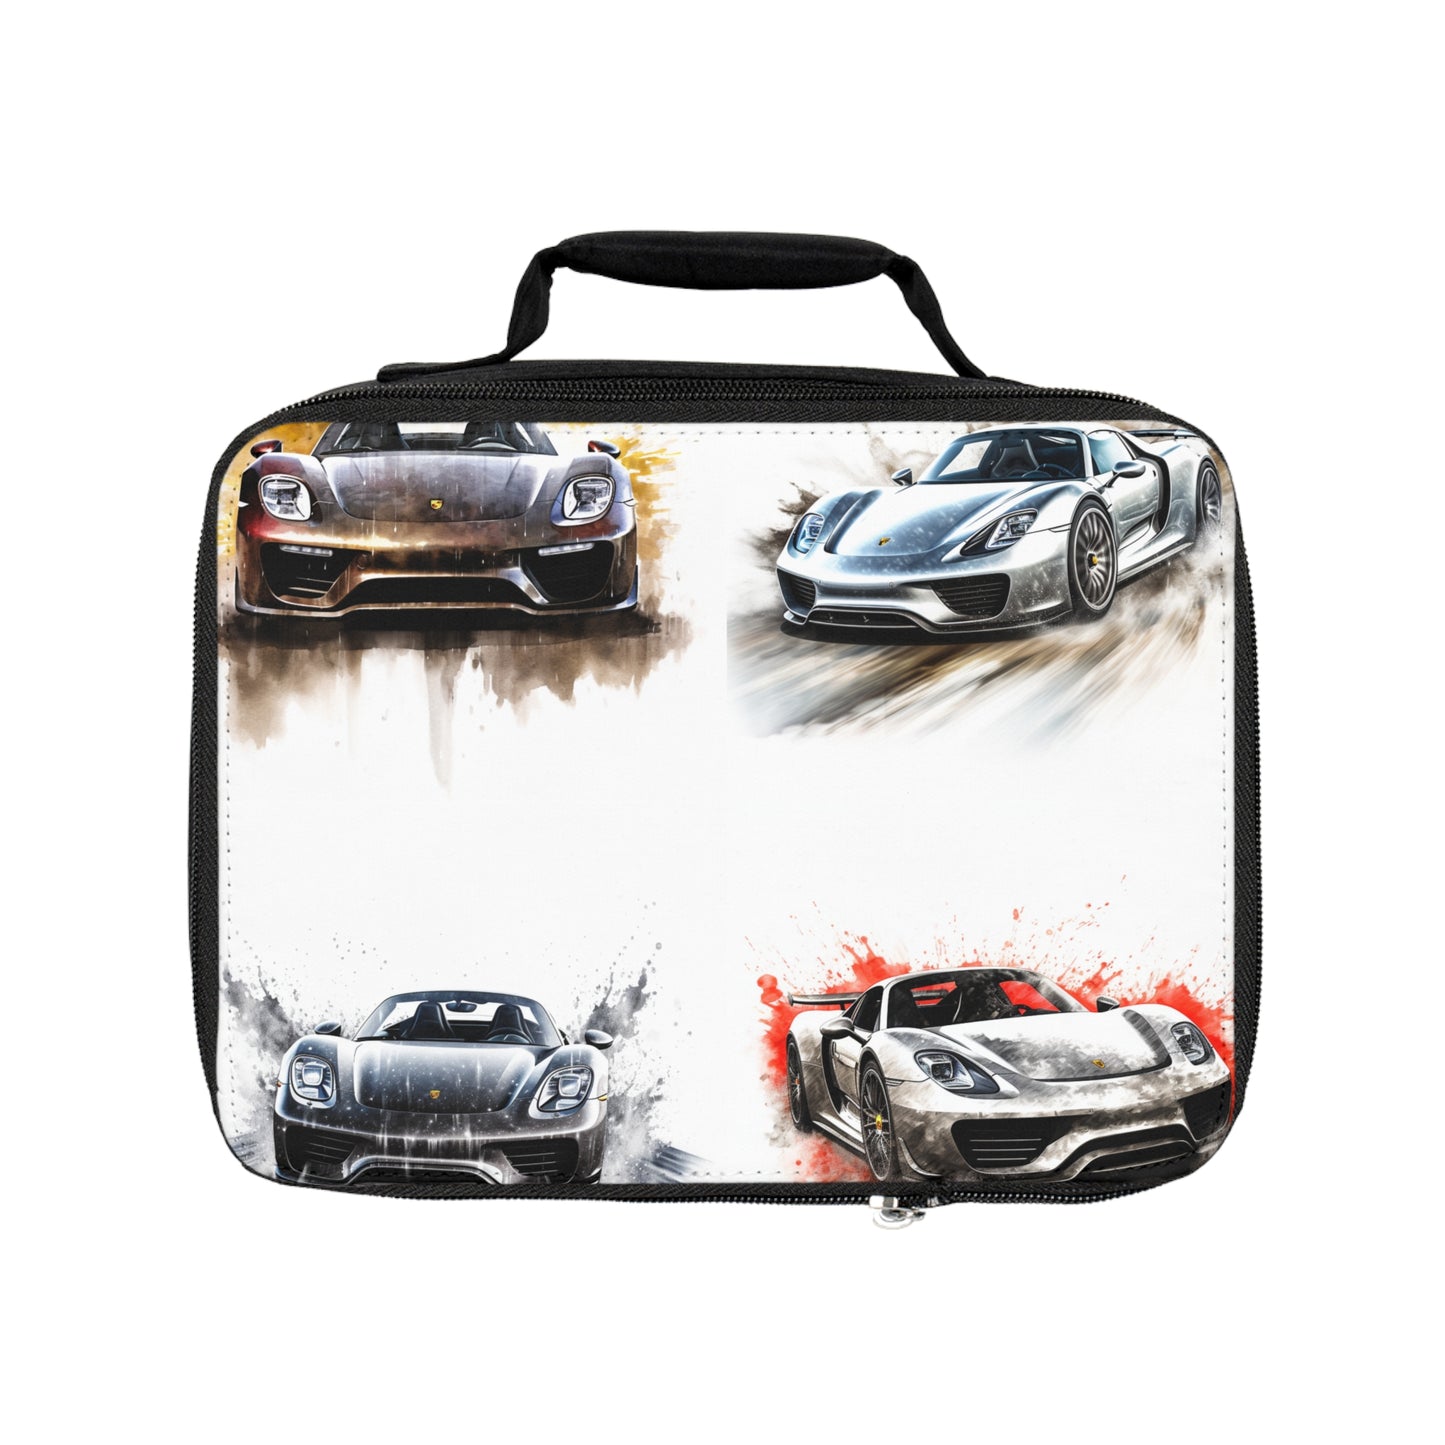 Lunch Bag 918 Spyder white background driving fast with water splashing 5